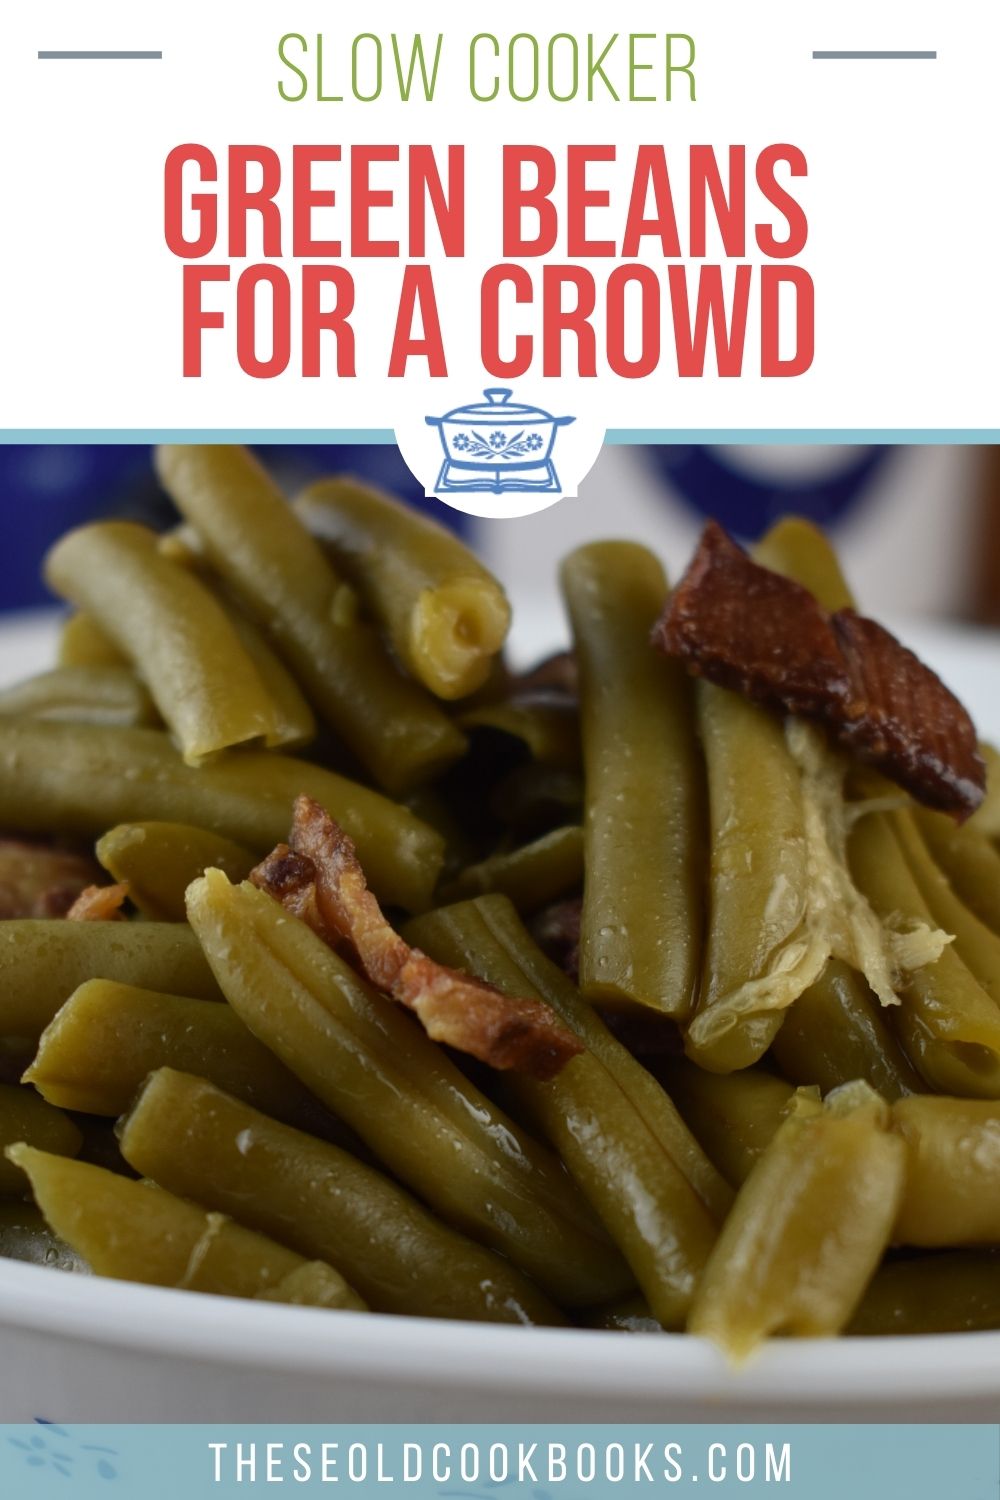 How to Make Perfect Crockpot Green Beans Recipe - The Kitchen Wife